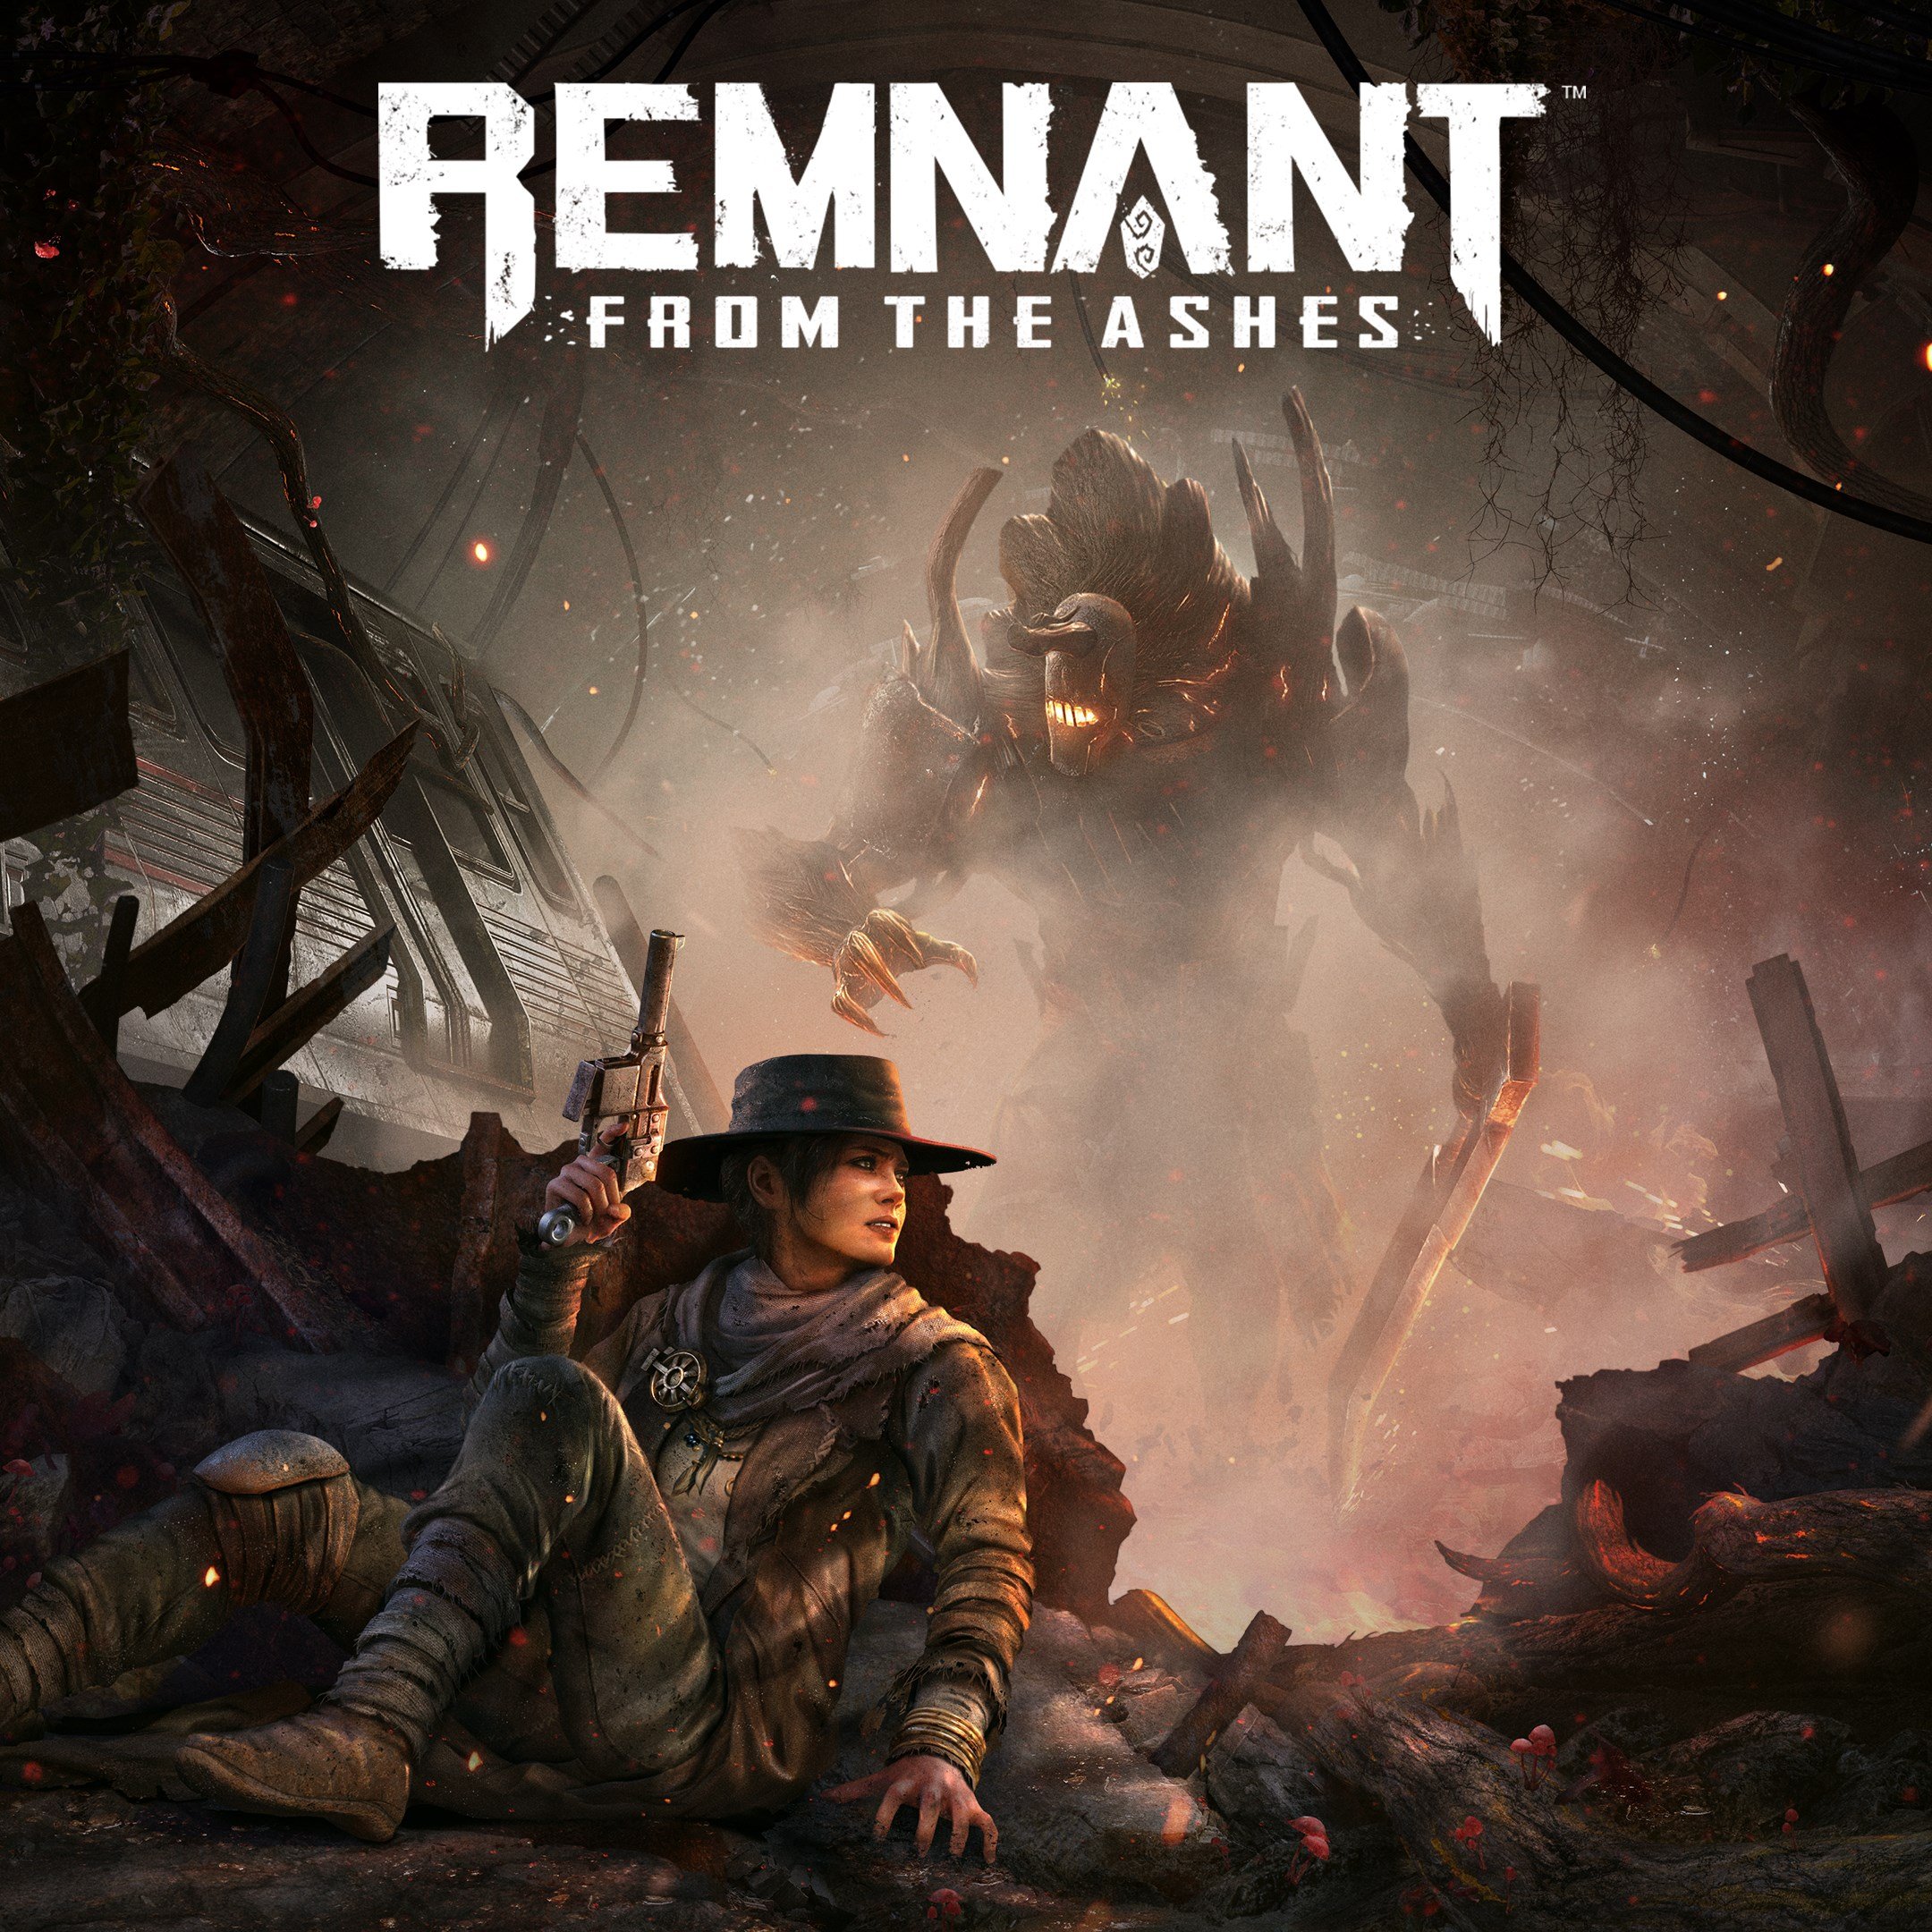 Boxart for Remnant: From the Ashes